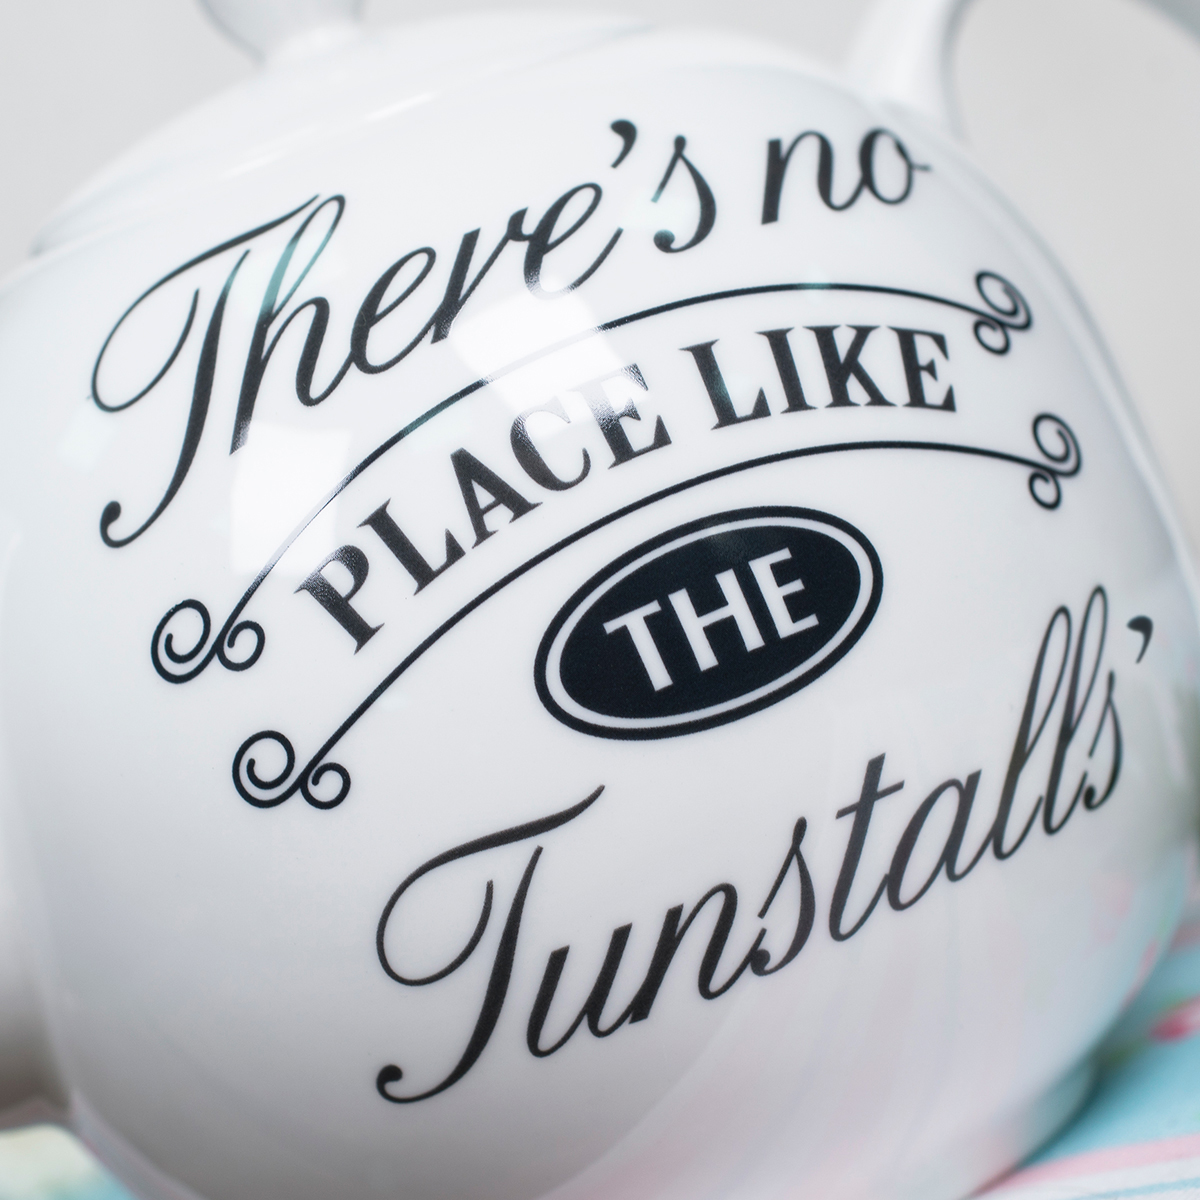 Personalised Bone China Teapot - There's No Place Like Home